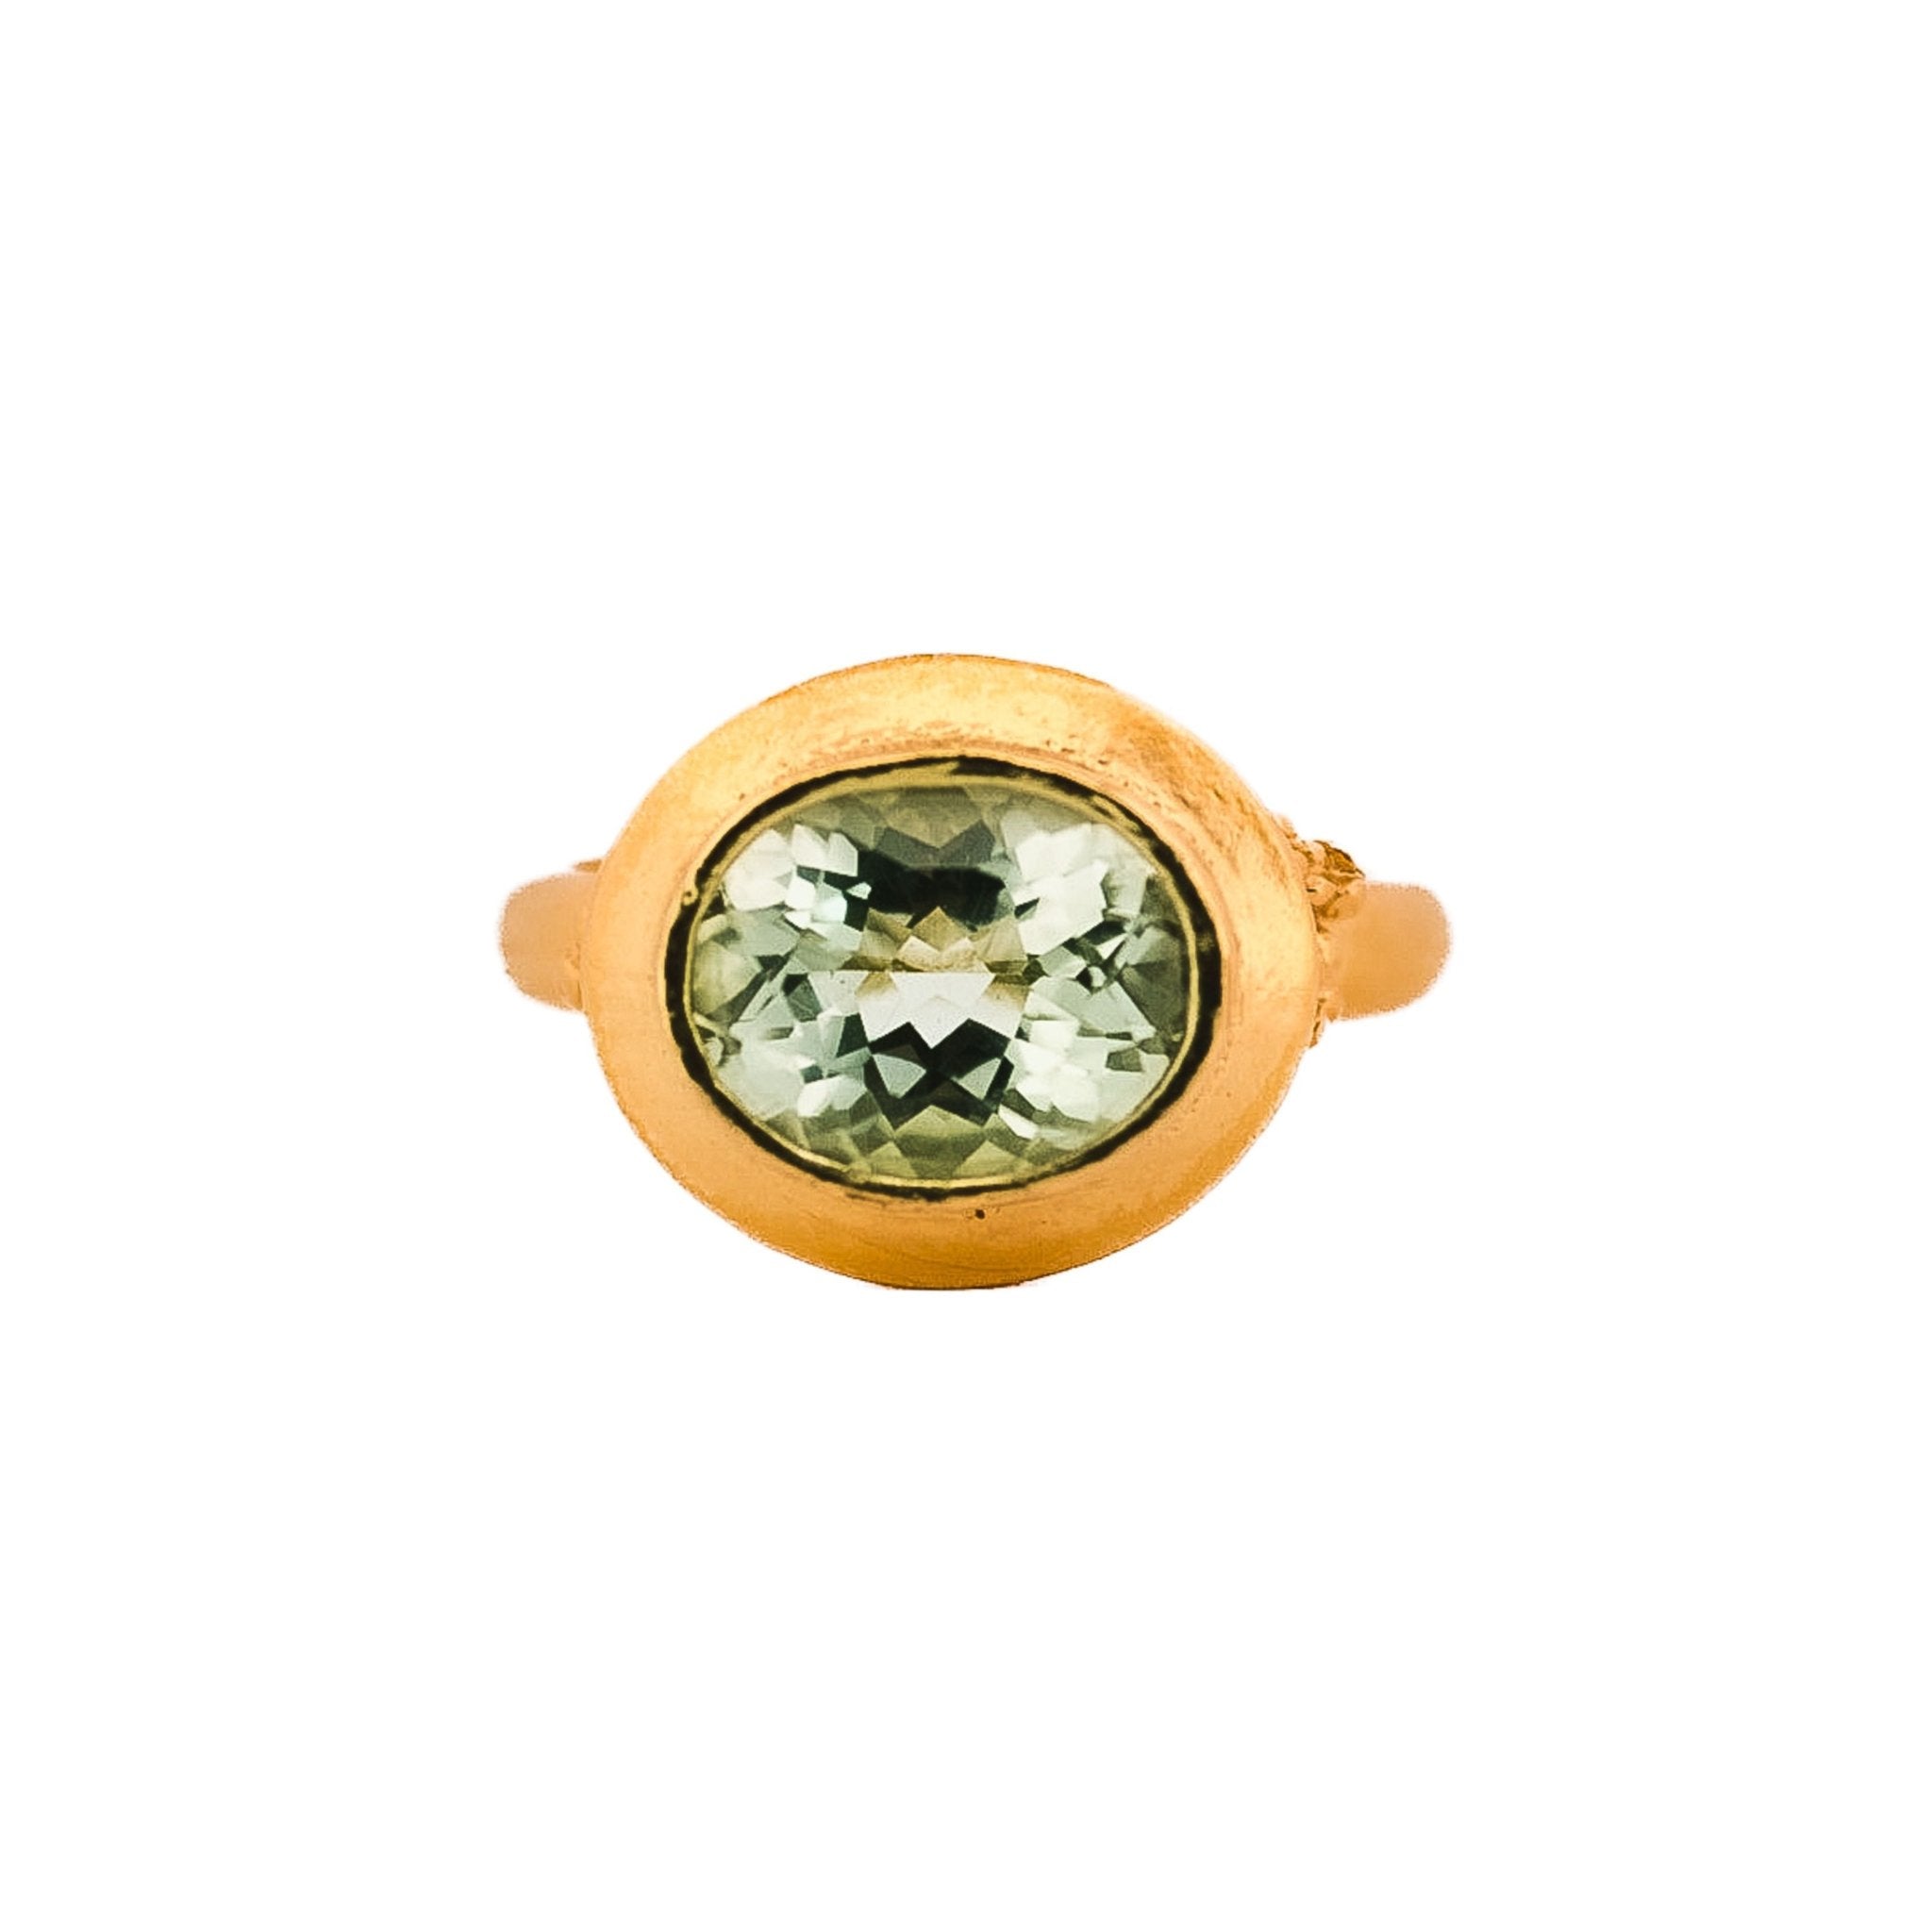 Solid Gold Margo Ring - Dainty London